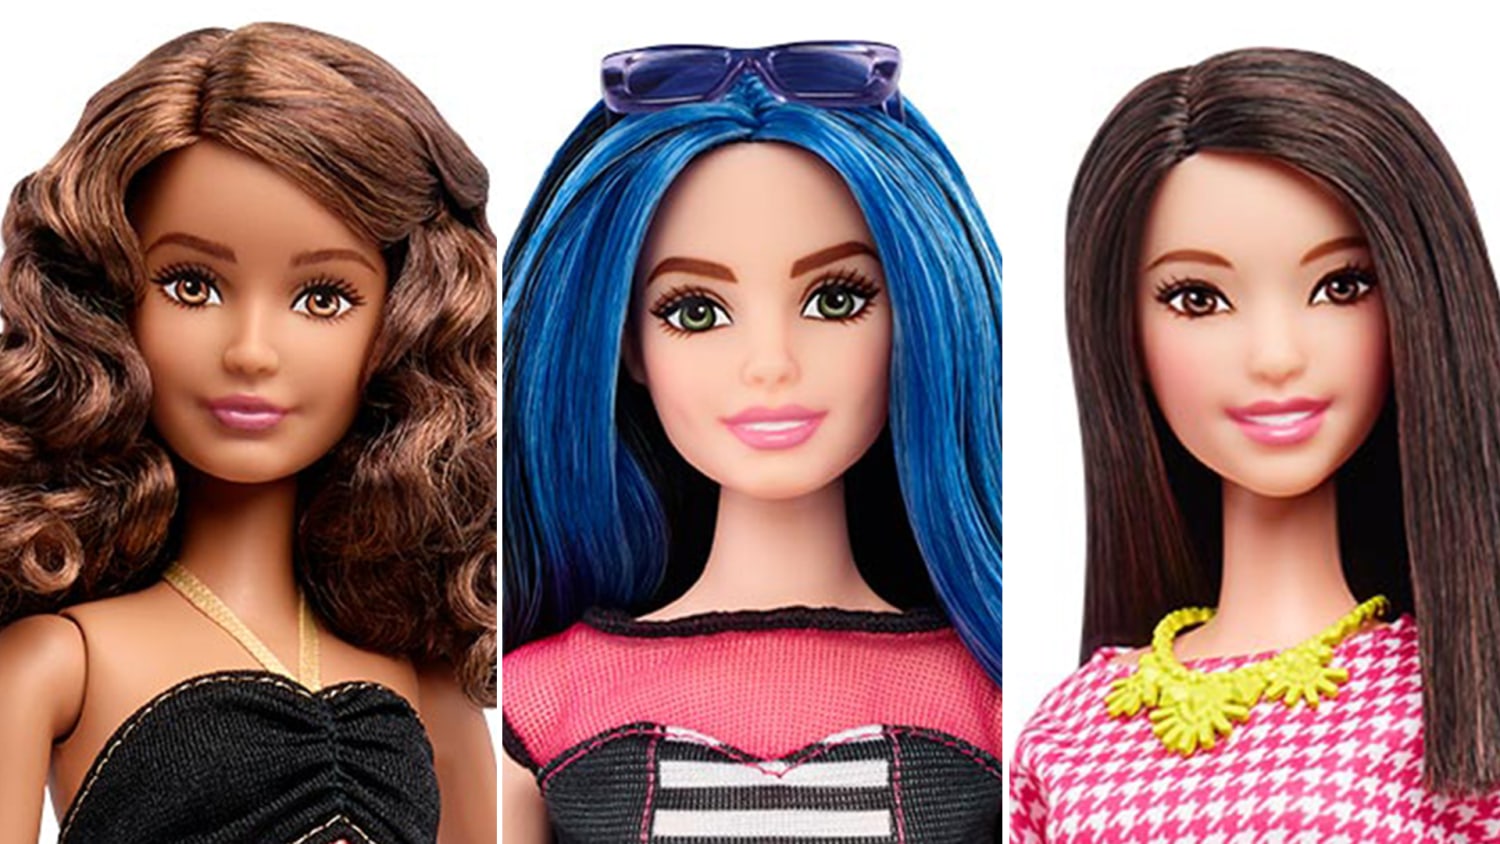 Barbie unveils new dolls with curvy, tall and petite body types